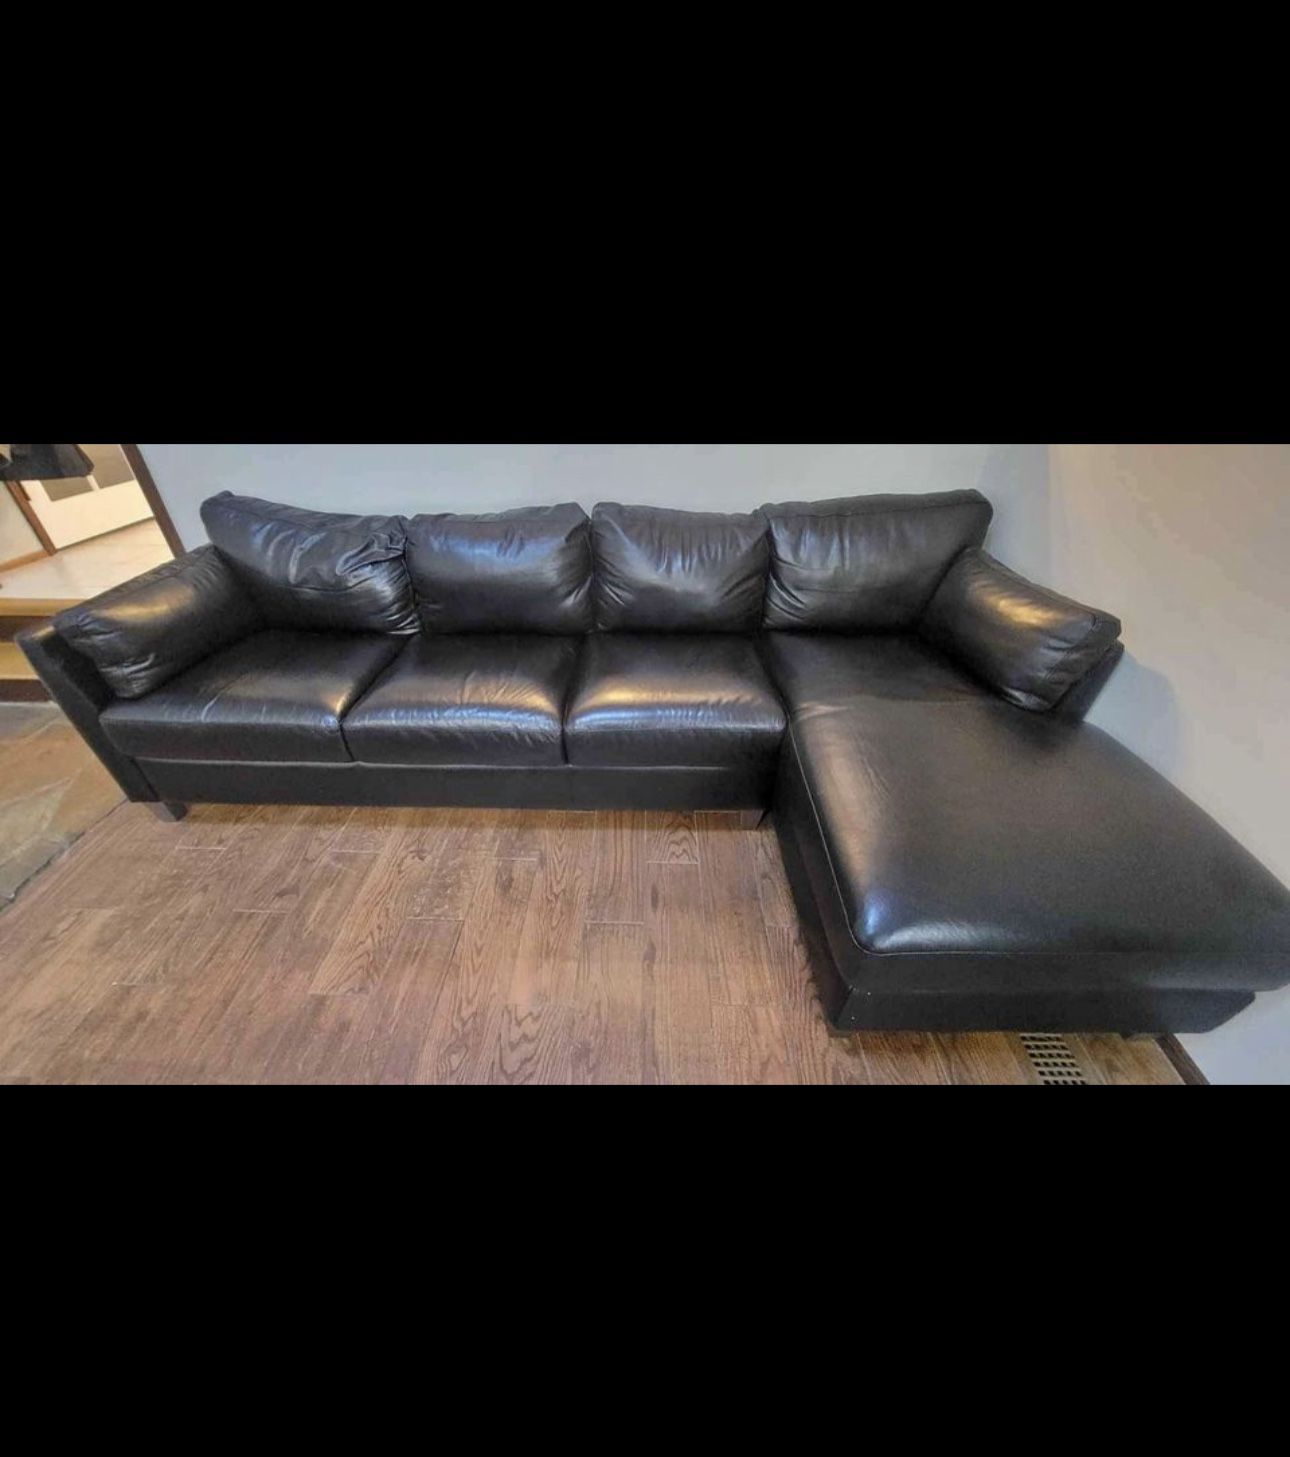 FREE DELIVERY (Natuzzi Leather Sectional)